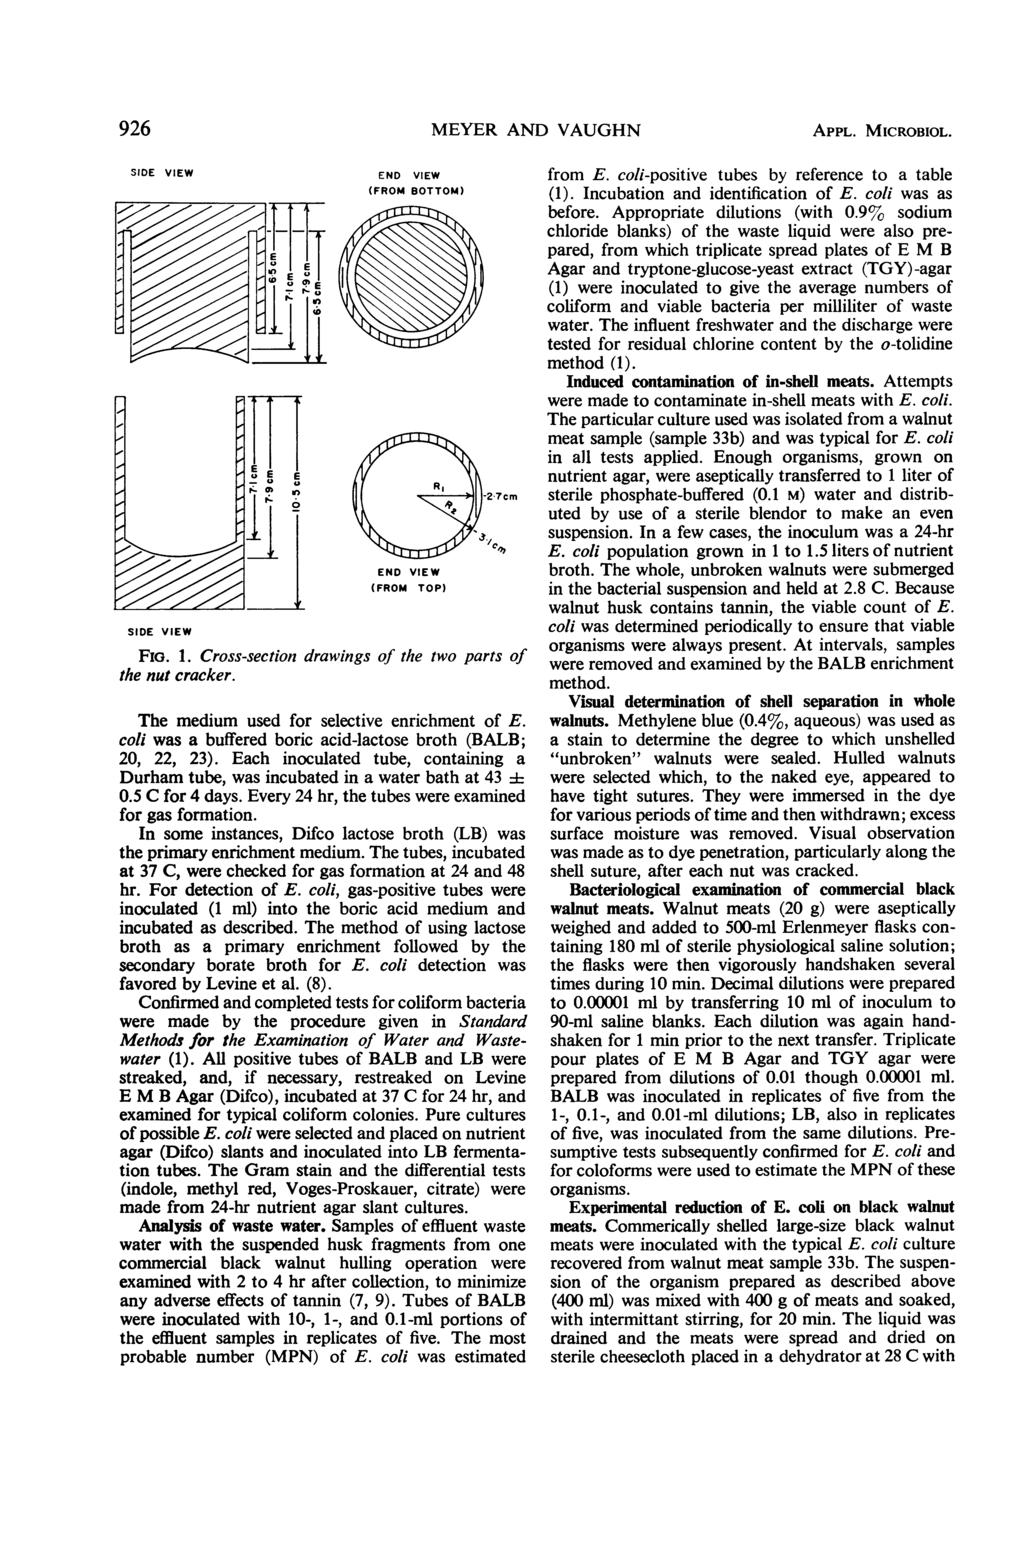 926 MEYER AND VAUGHN APPL. MICROBIOL. SIDE VIEW I--,.1, 5. A, " I--, 11-11 i SIDE VIEW.11E 0 E.1 E 0 0 E It- 0 1. 40 END VIEW (FROM BOTTOM) END VIEW (FROM TOP) Fia. 1. Cross-section drawings of the two parts of the nut cracker.